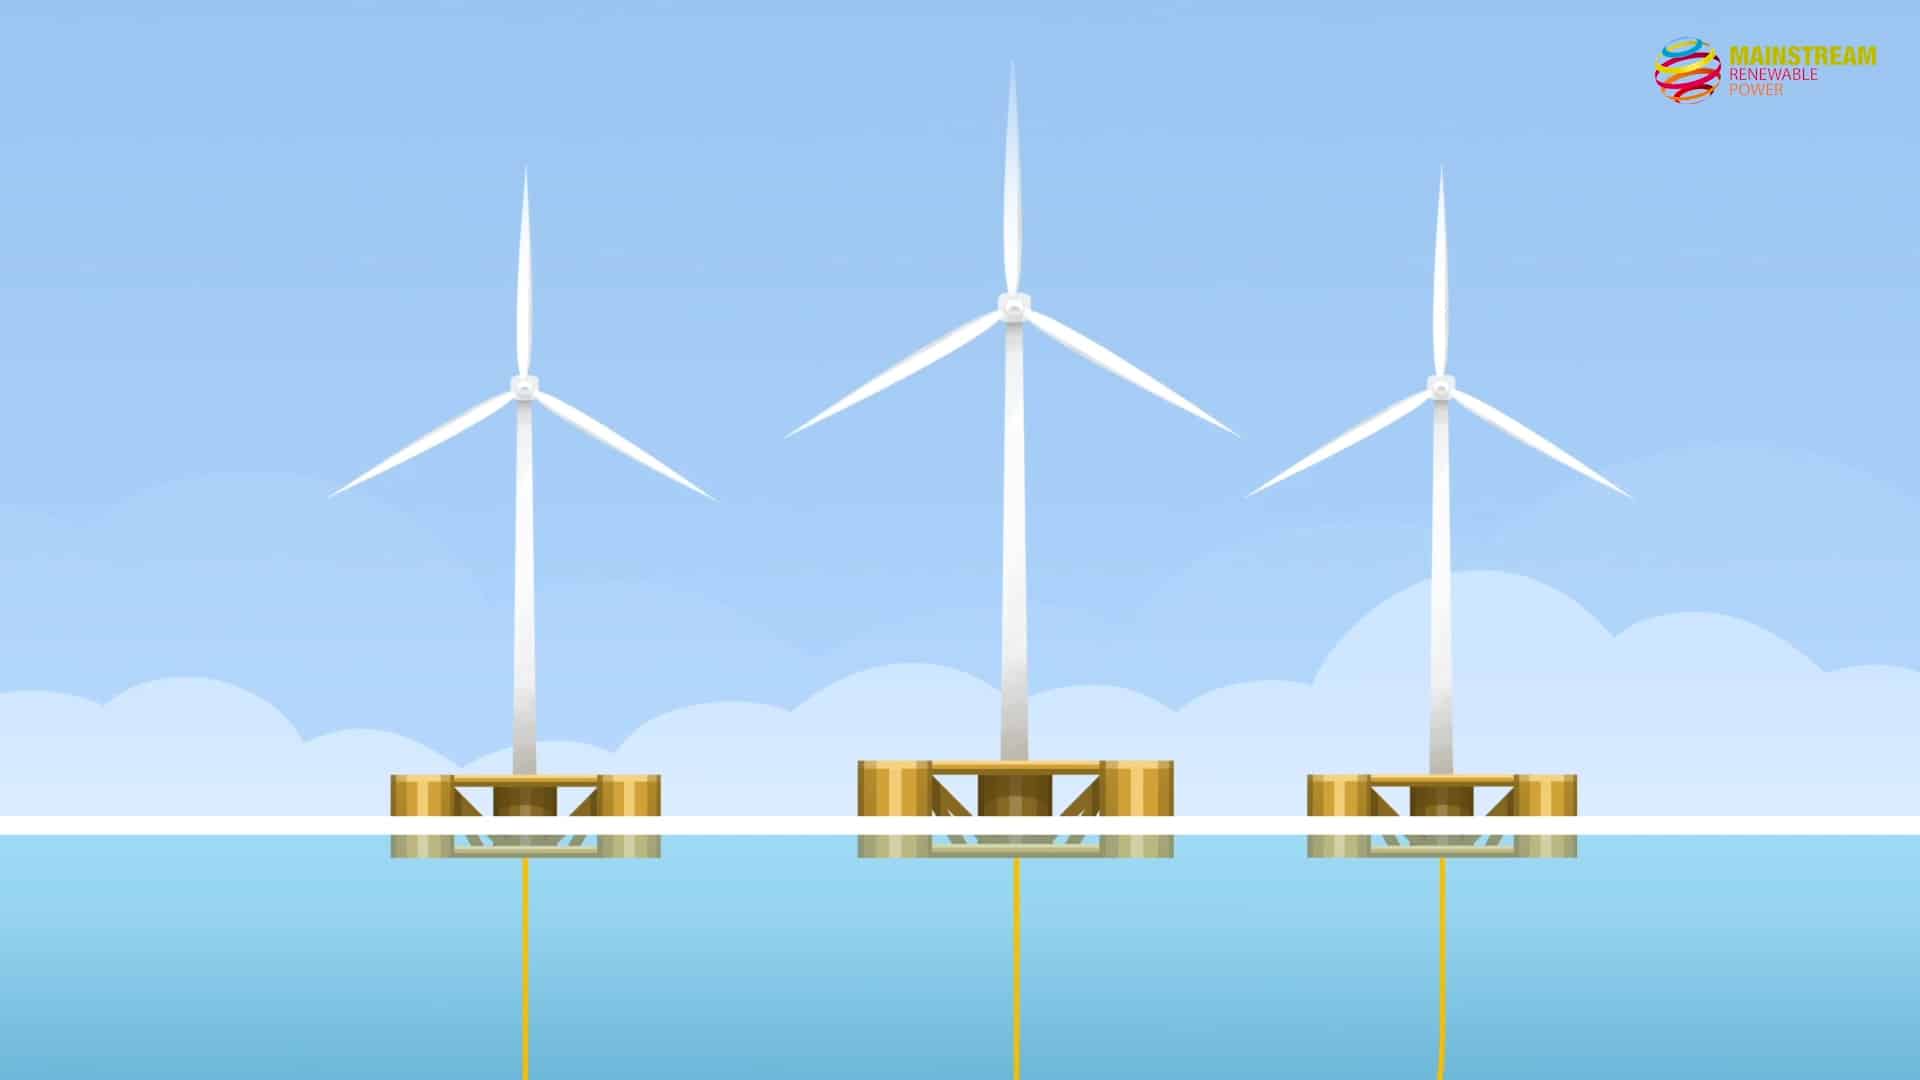 Video thumbnail of branded artowrk showing three floating offshore wind turbines